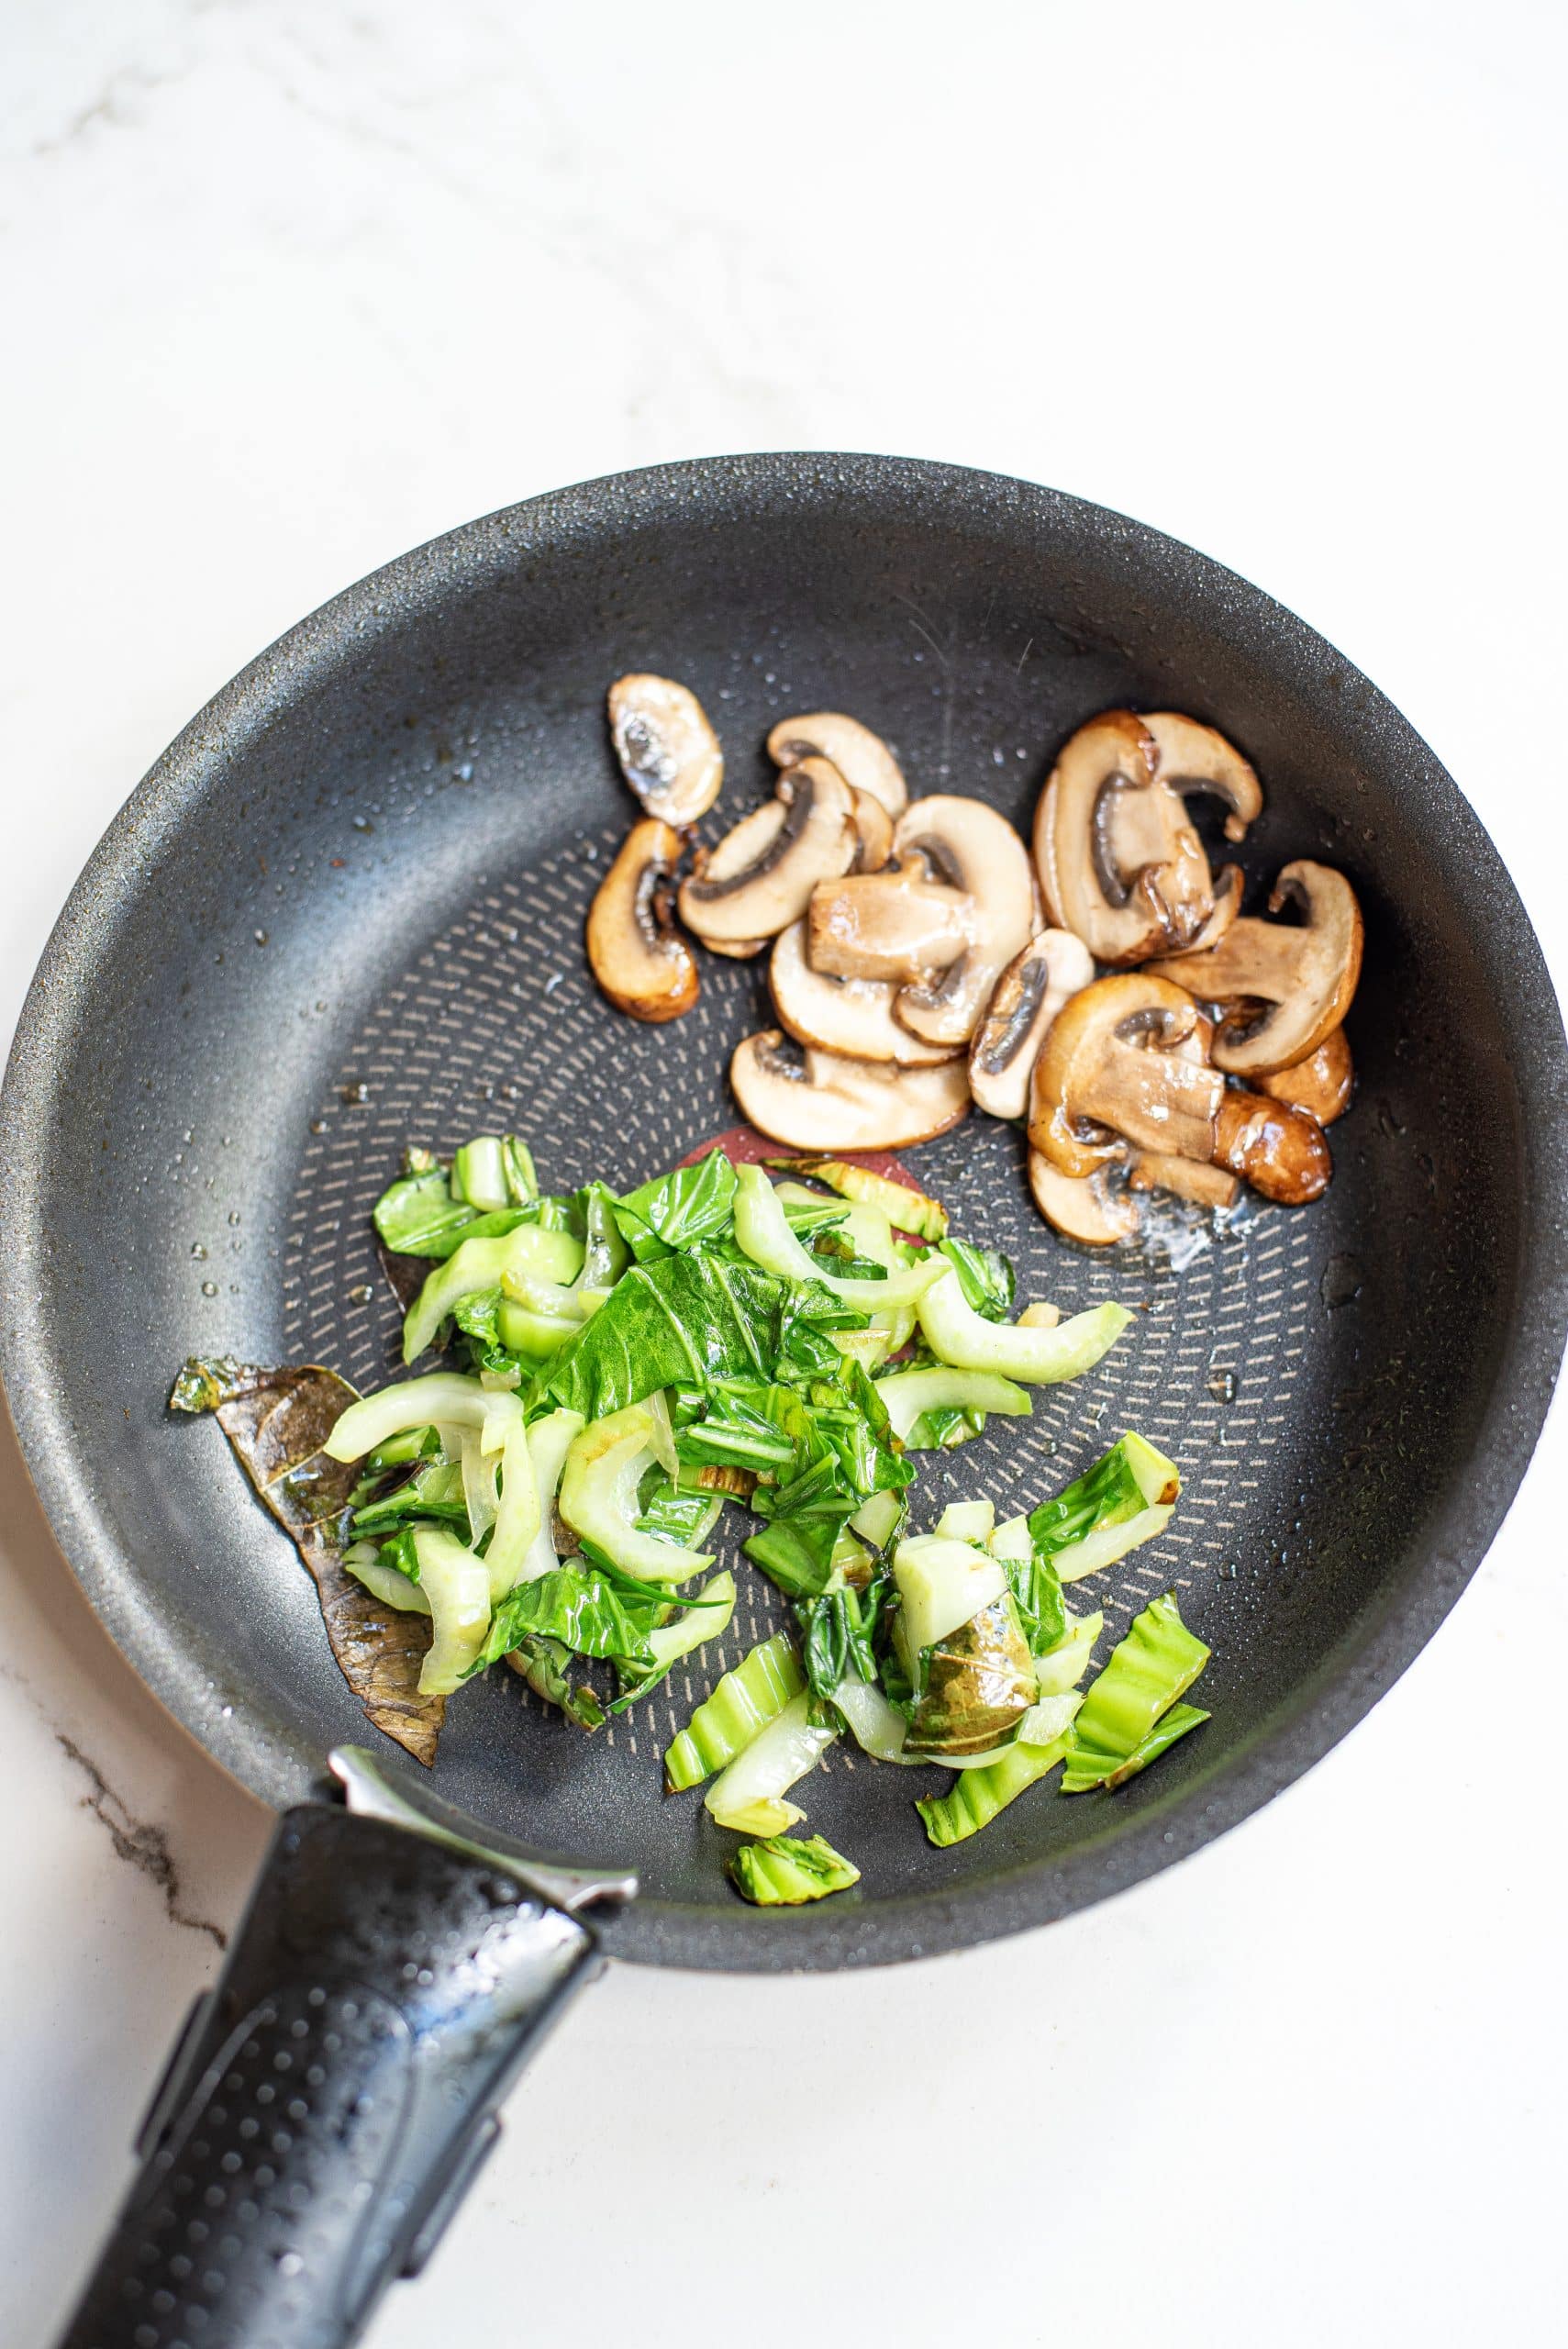 Top view photo of bok choy and mushrrom cooking in a skillet until tender.